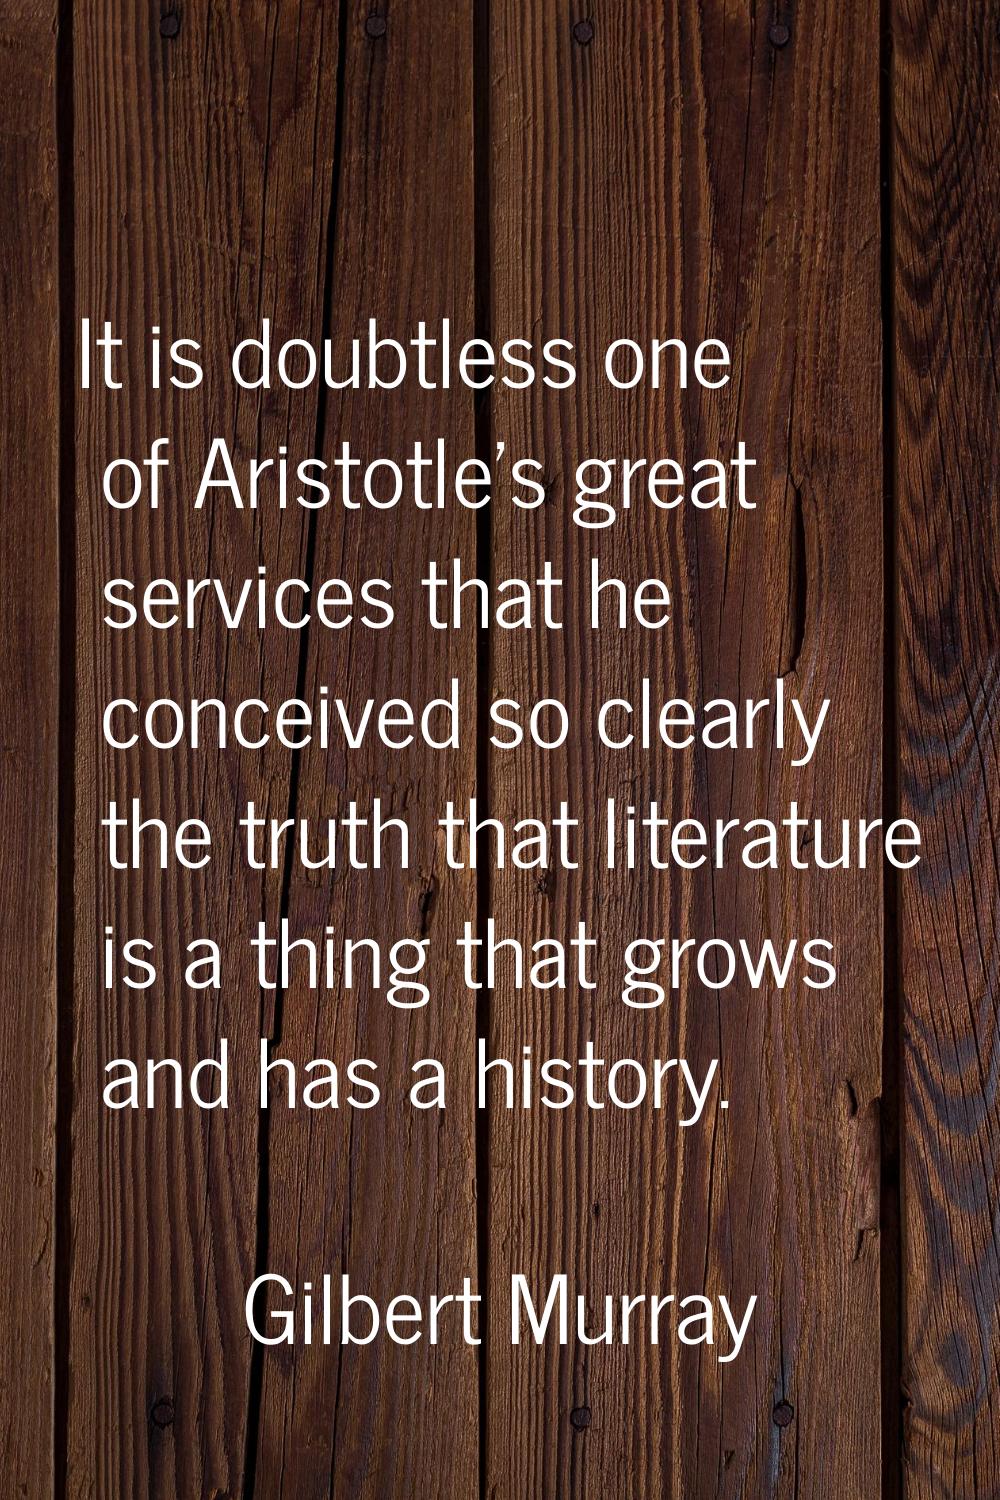 It is doubtless one of Aristotle's great services that he conceived so clearly the truth that liter